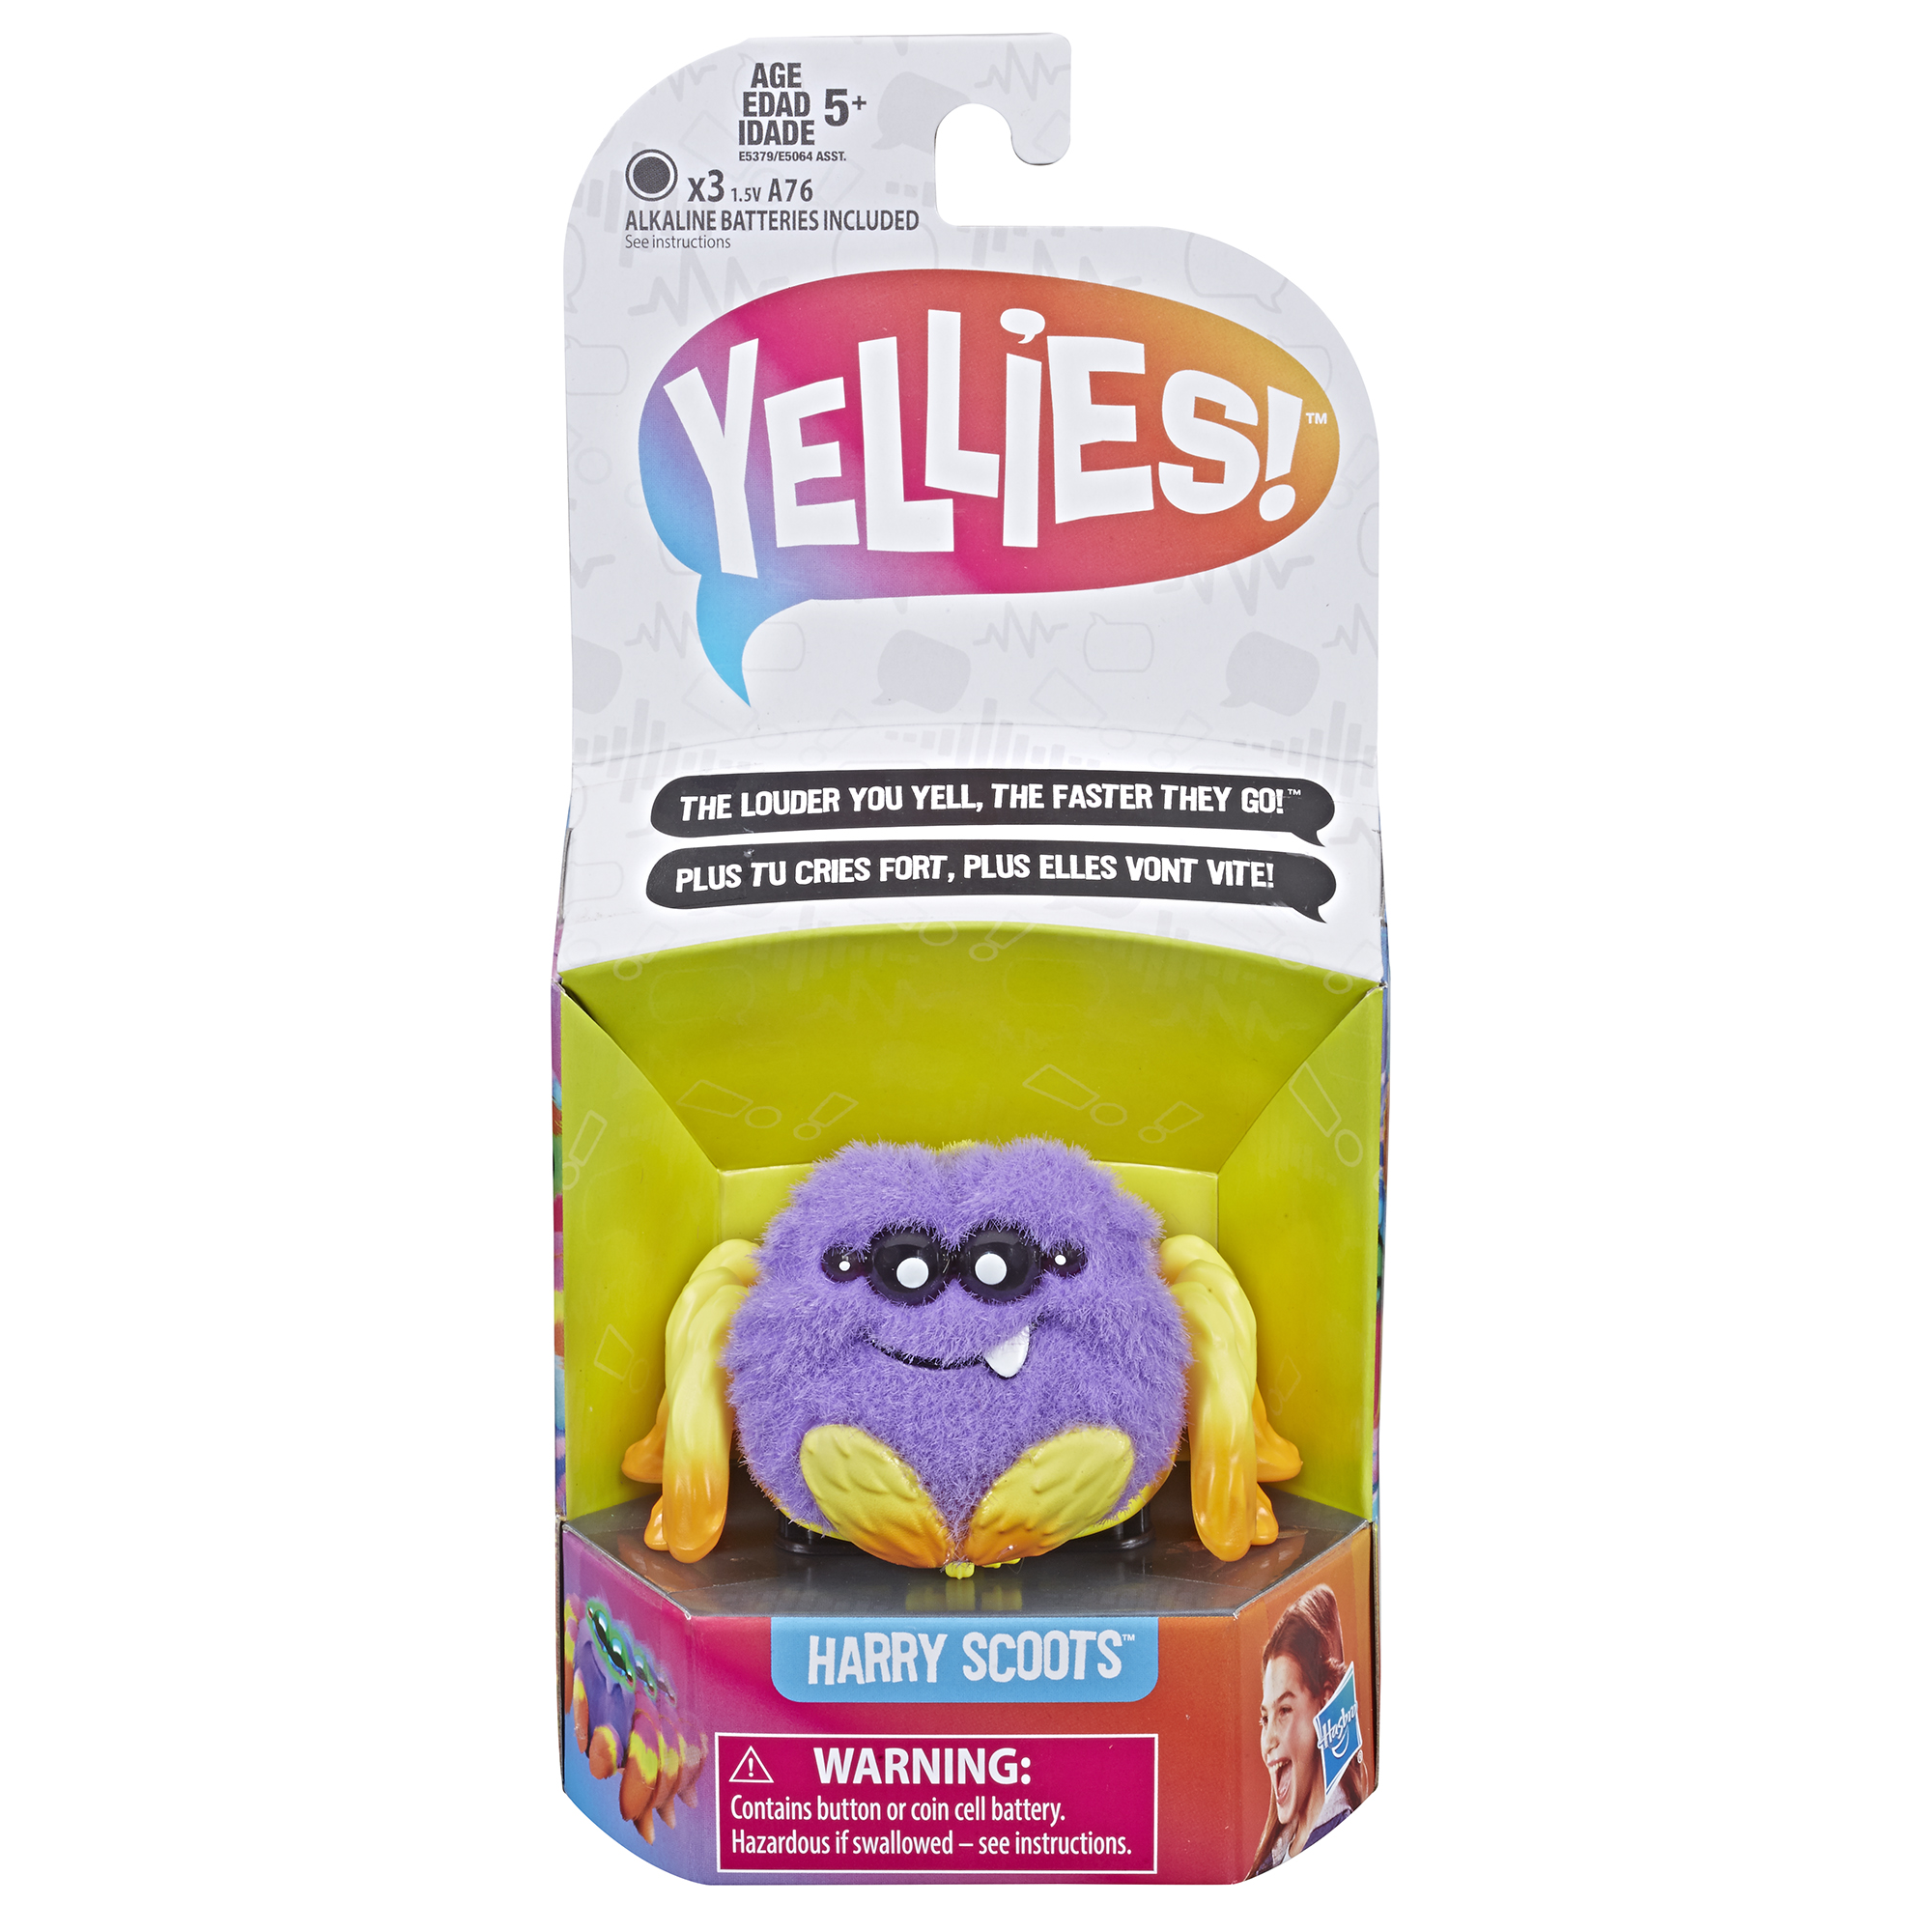 Yellies! Harry Scoots; Voice-activated Spider Pet; Ages 5 and up - image 4 of 10